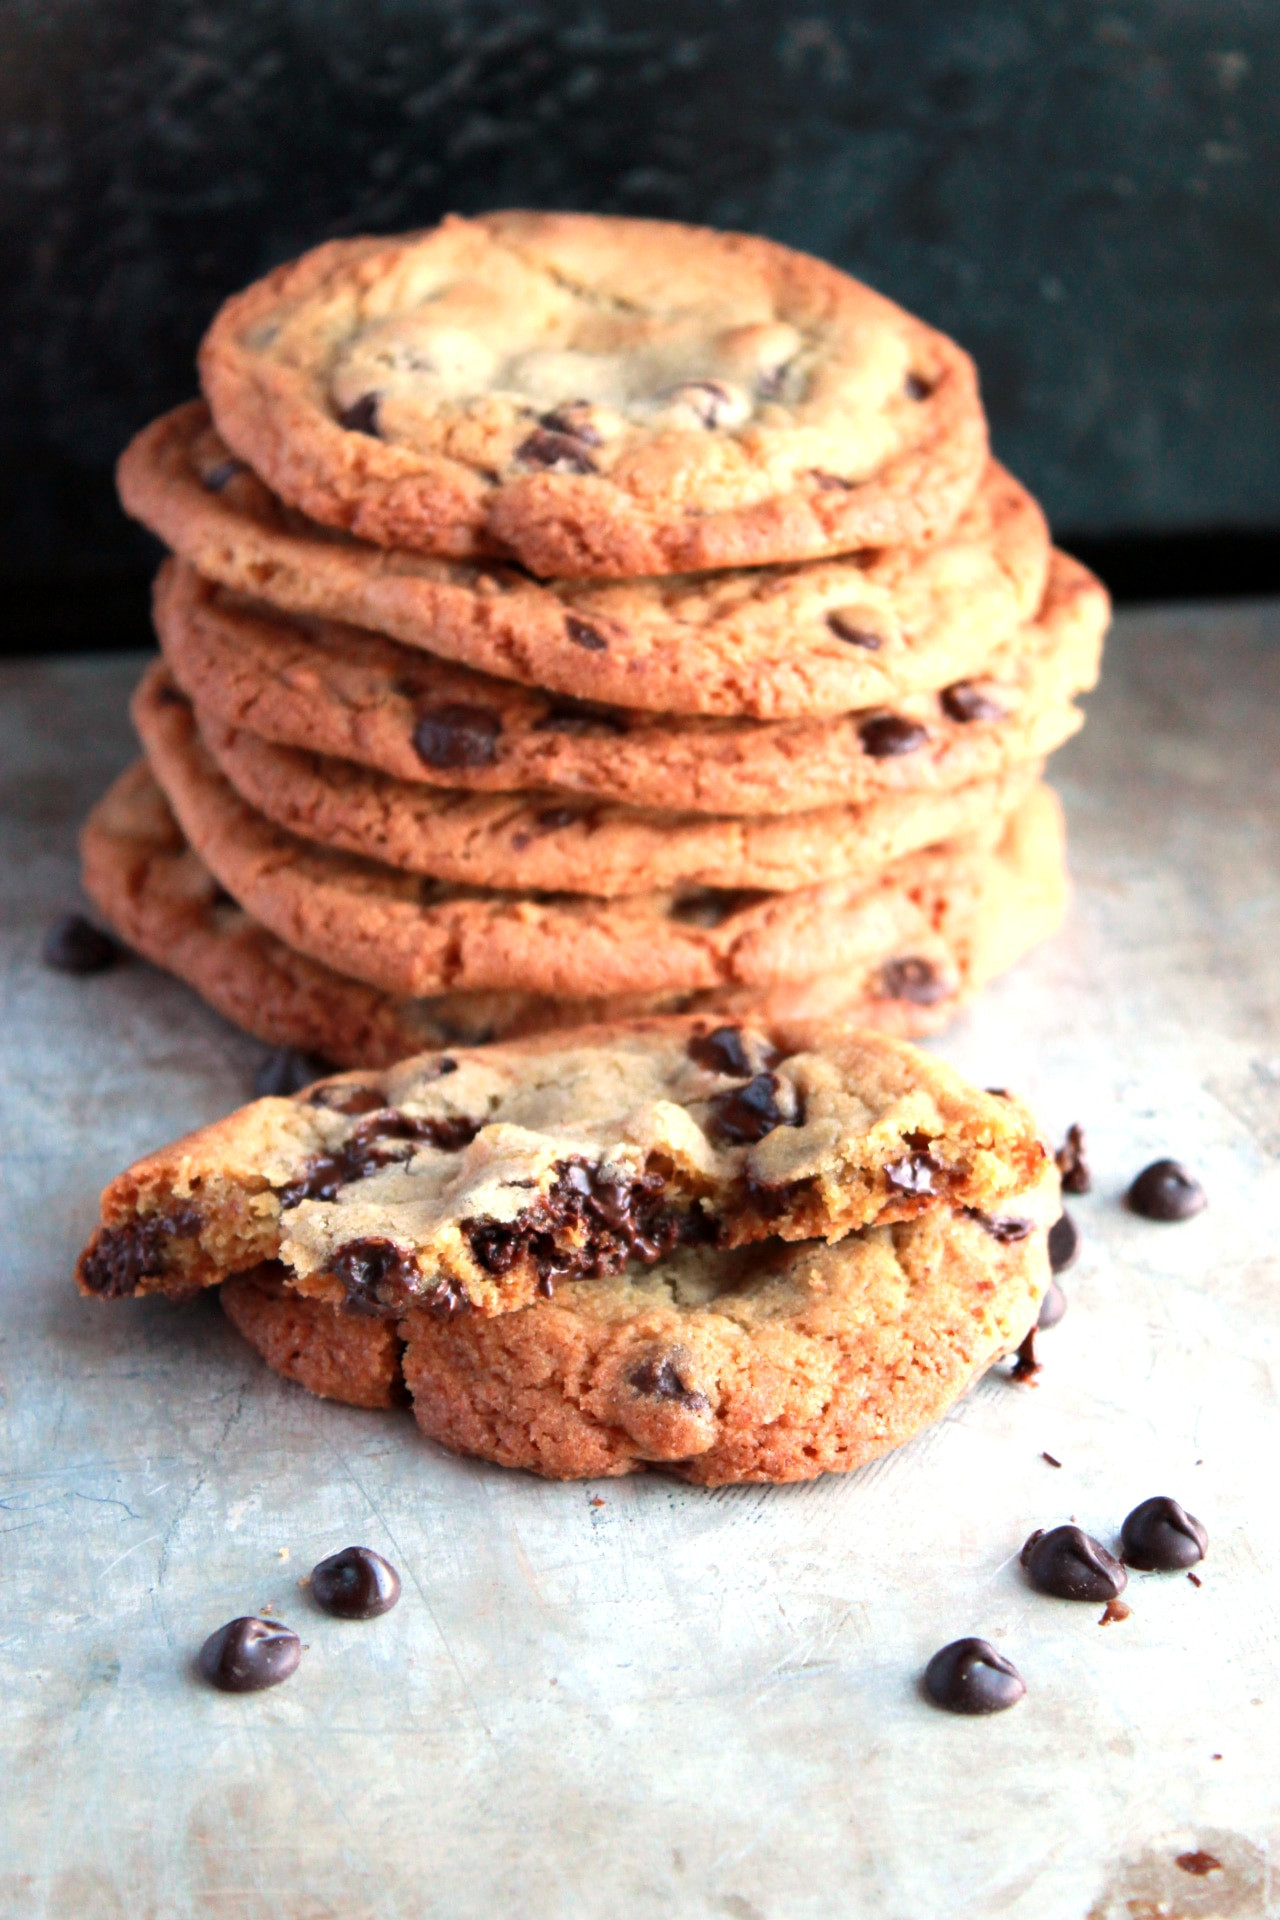 Classic Chocolate Chip Cookies
 Chocolate Chip Cookies Tjis rcipe is perfection in a cookie